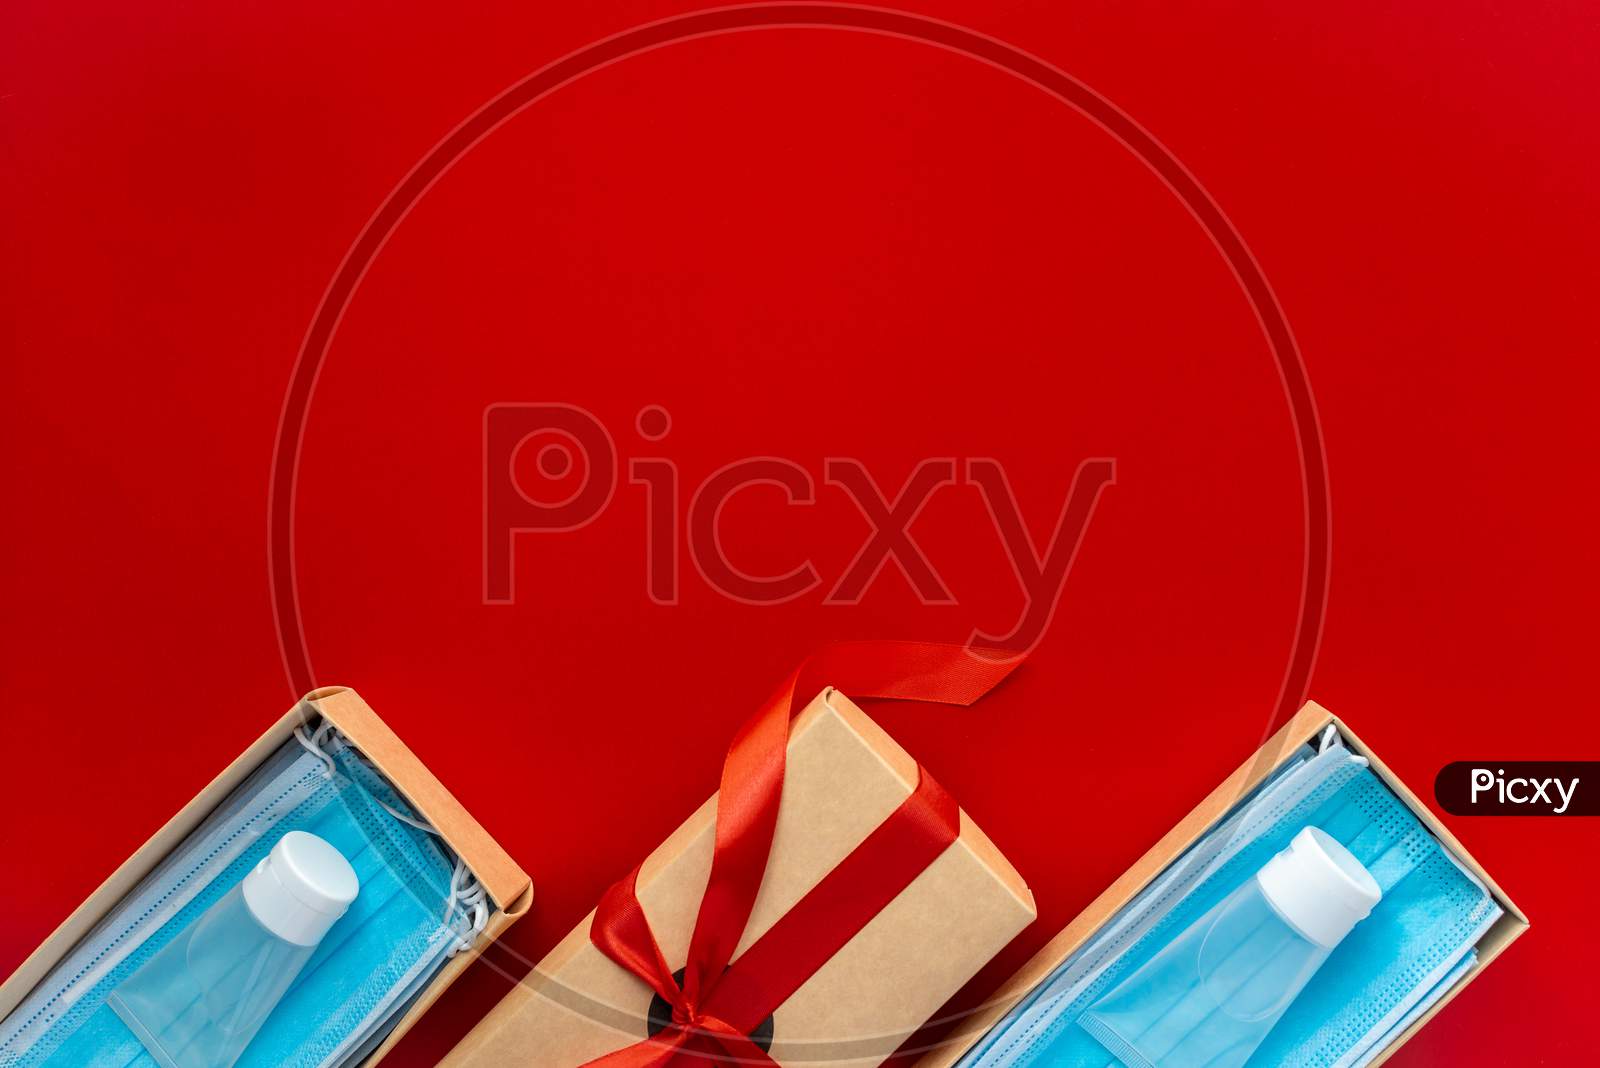 Packing A Christmas Present During Coronavirus Epidemic. Face Masks And Hydroalcoholic Gels Inside A Cardboard Box Decorated With A Bow On A Red Background.